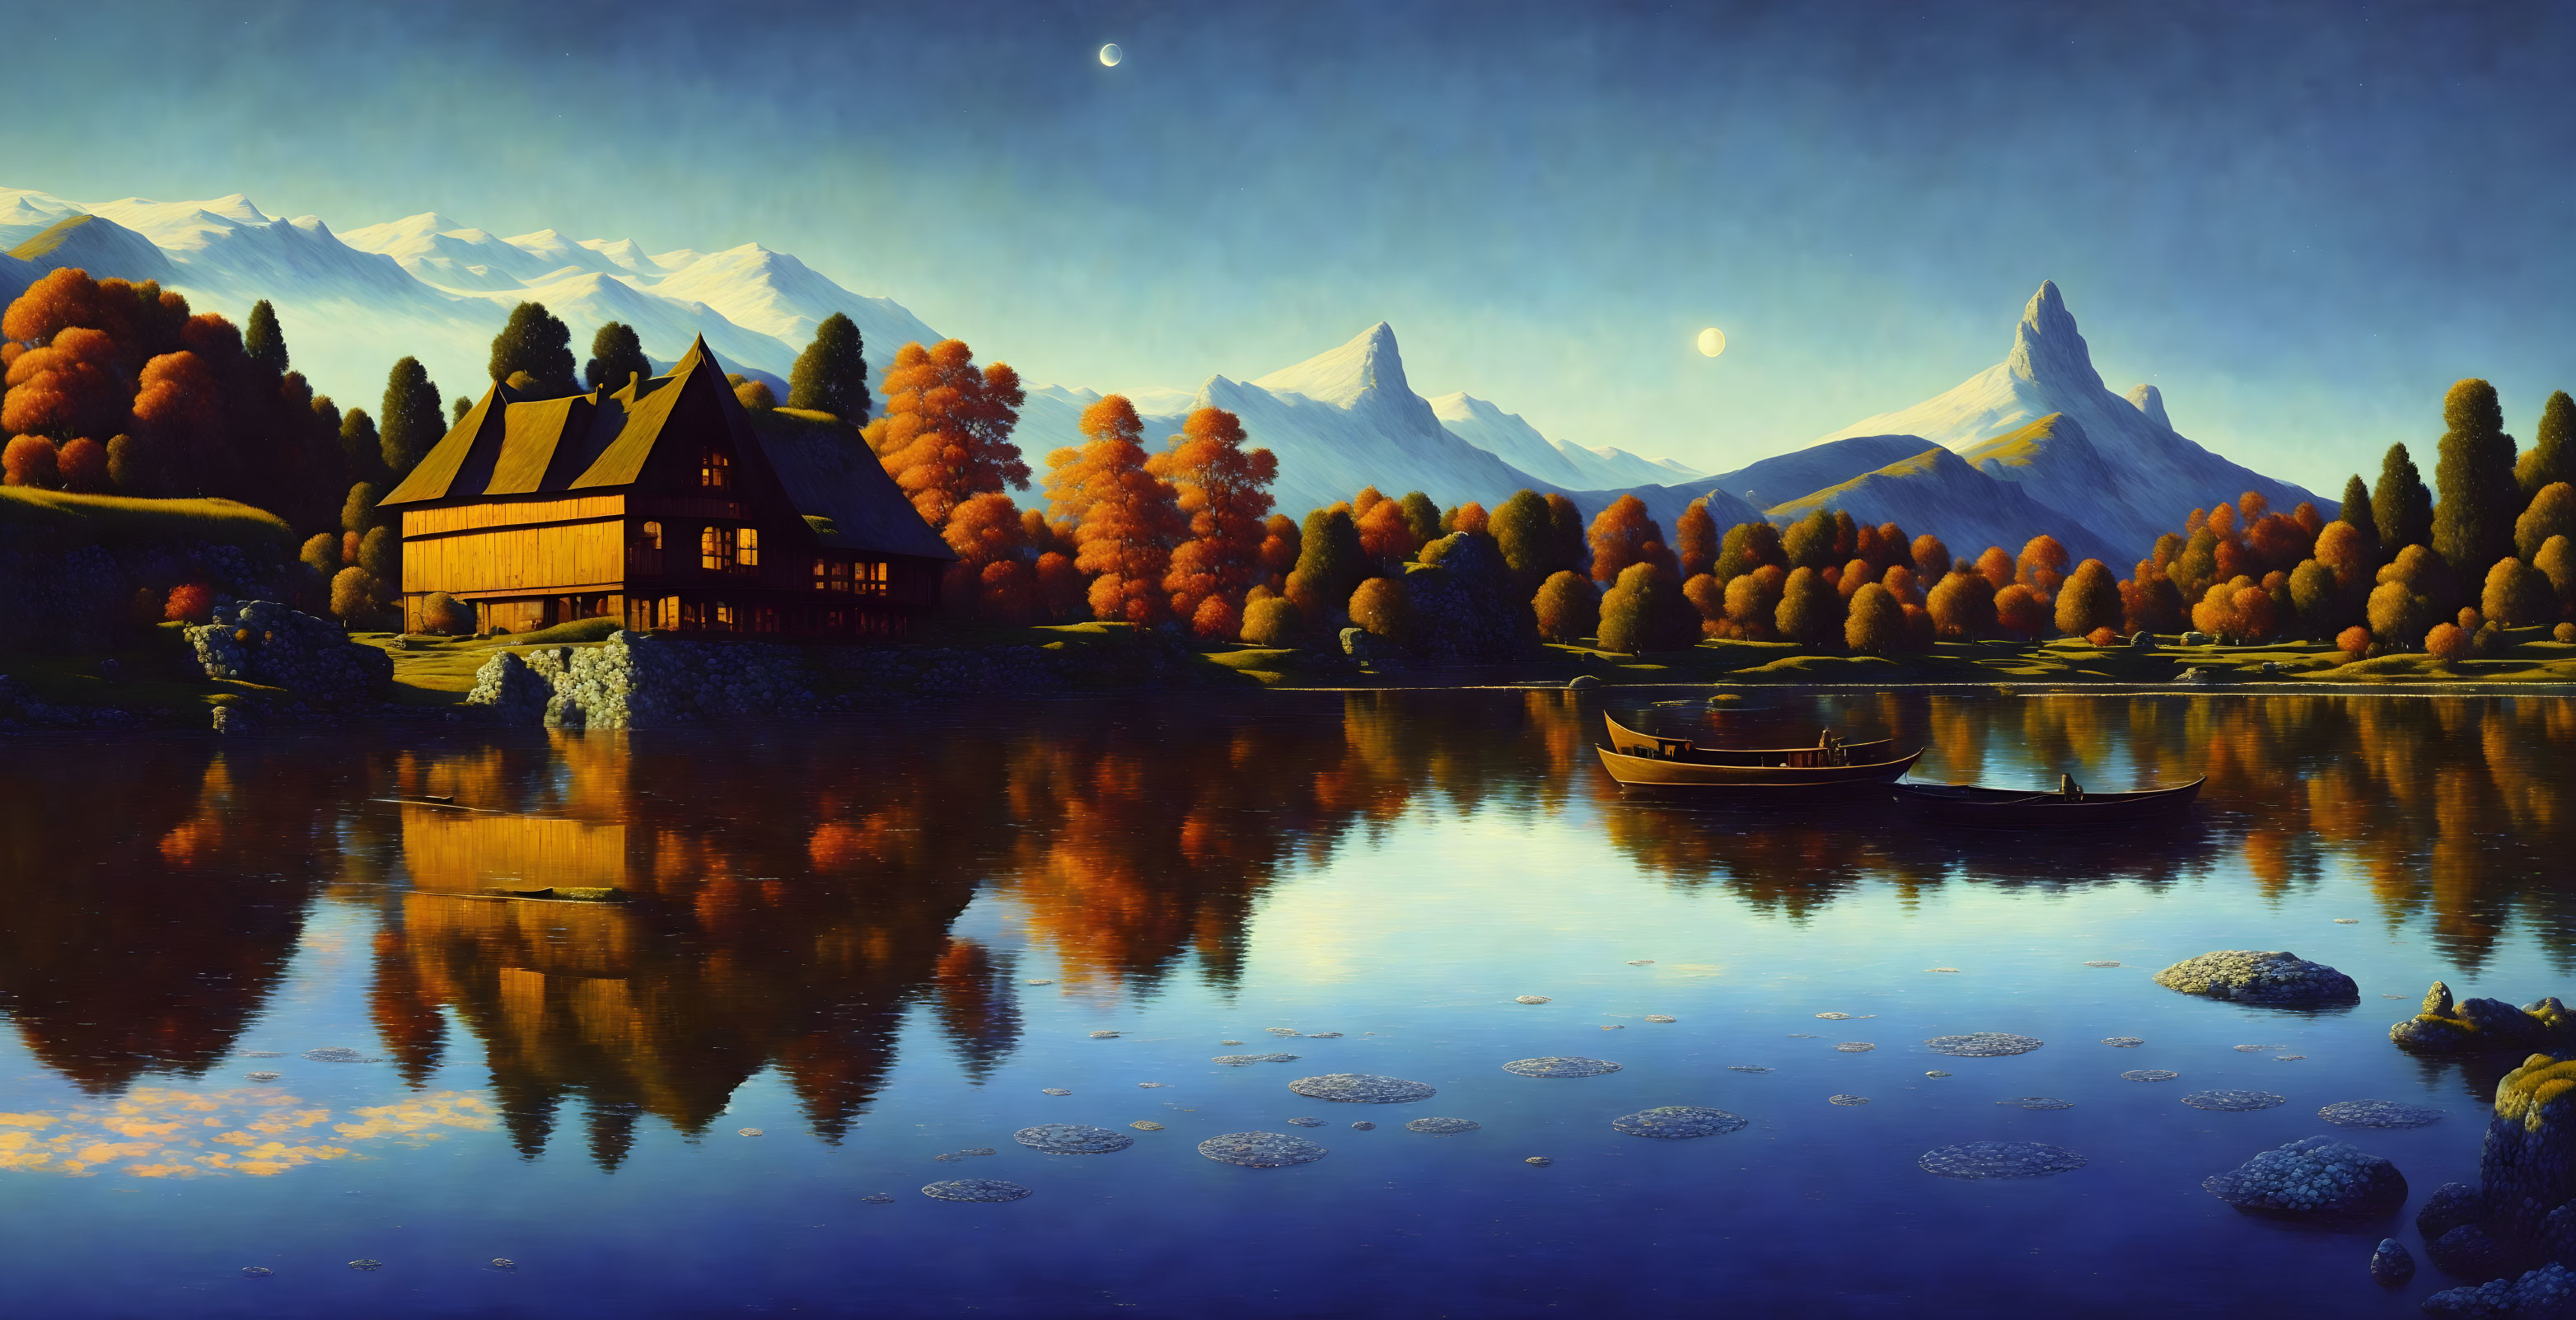 Tranquil lake with house, autumn trees, mountains, and moonlit sky